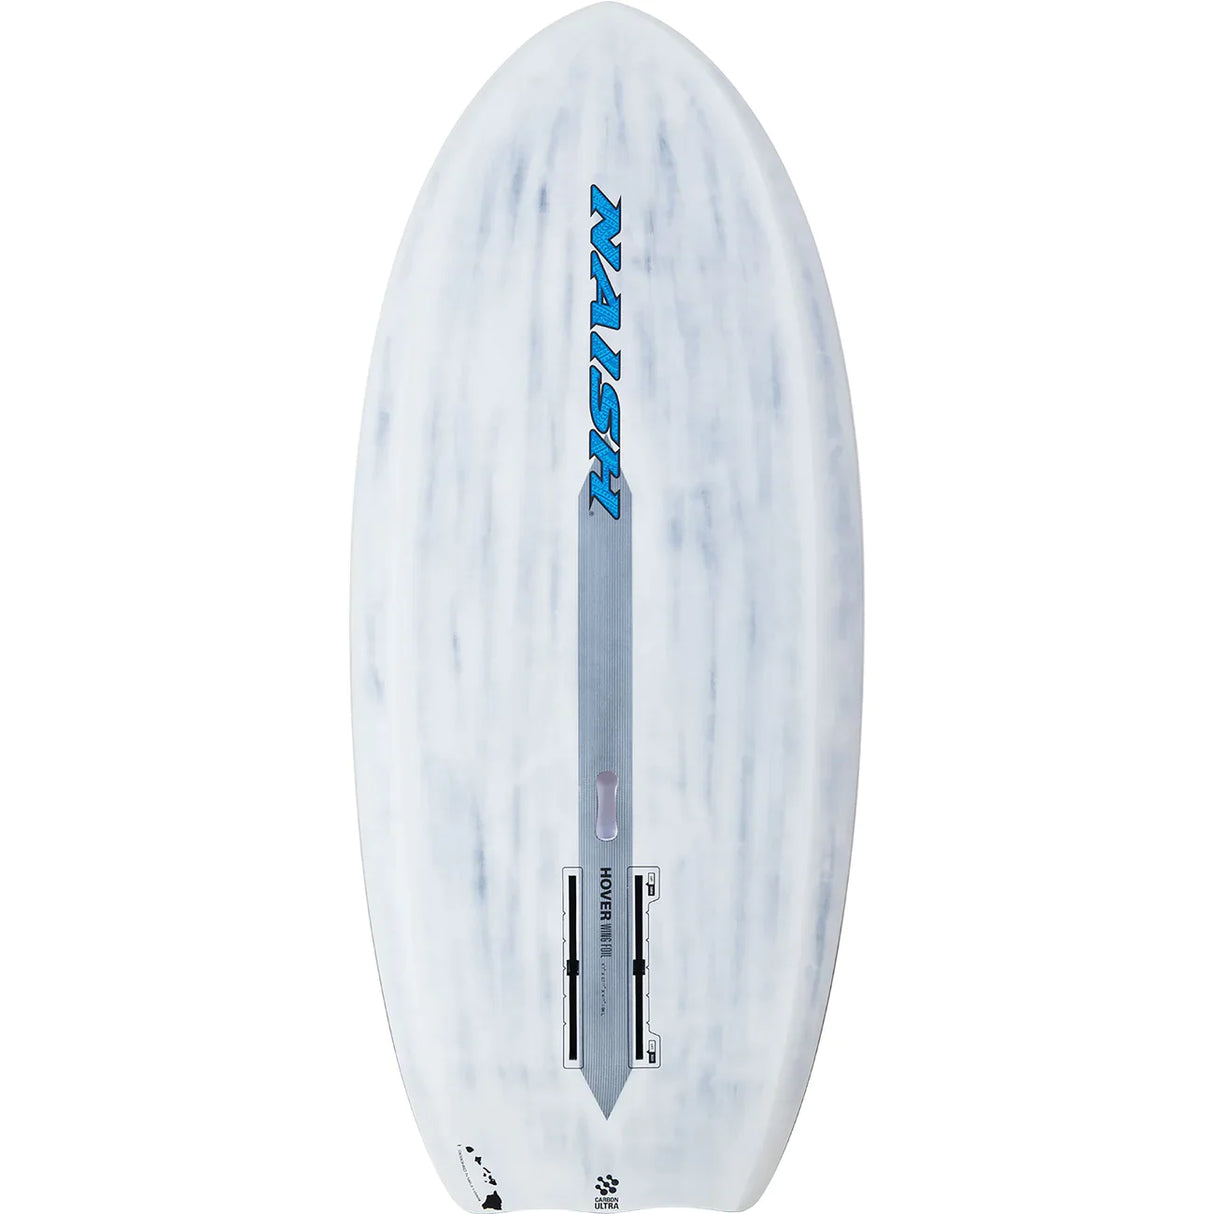 Naish Hover Wing Foil Carbon Board